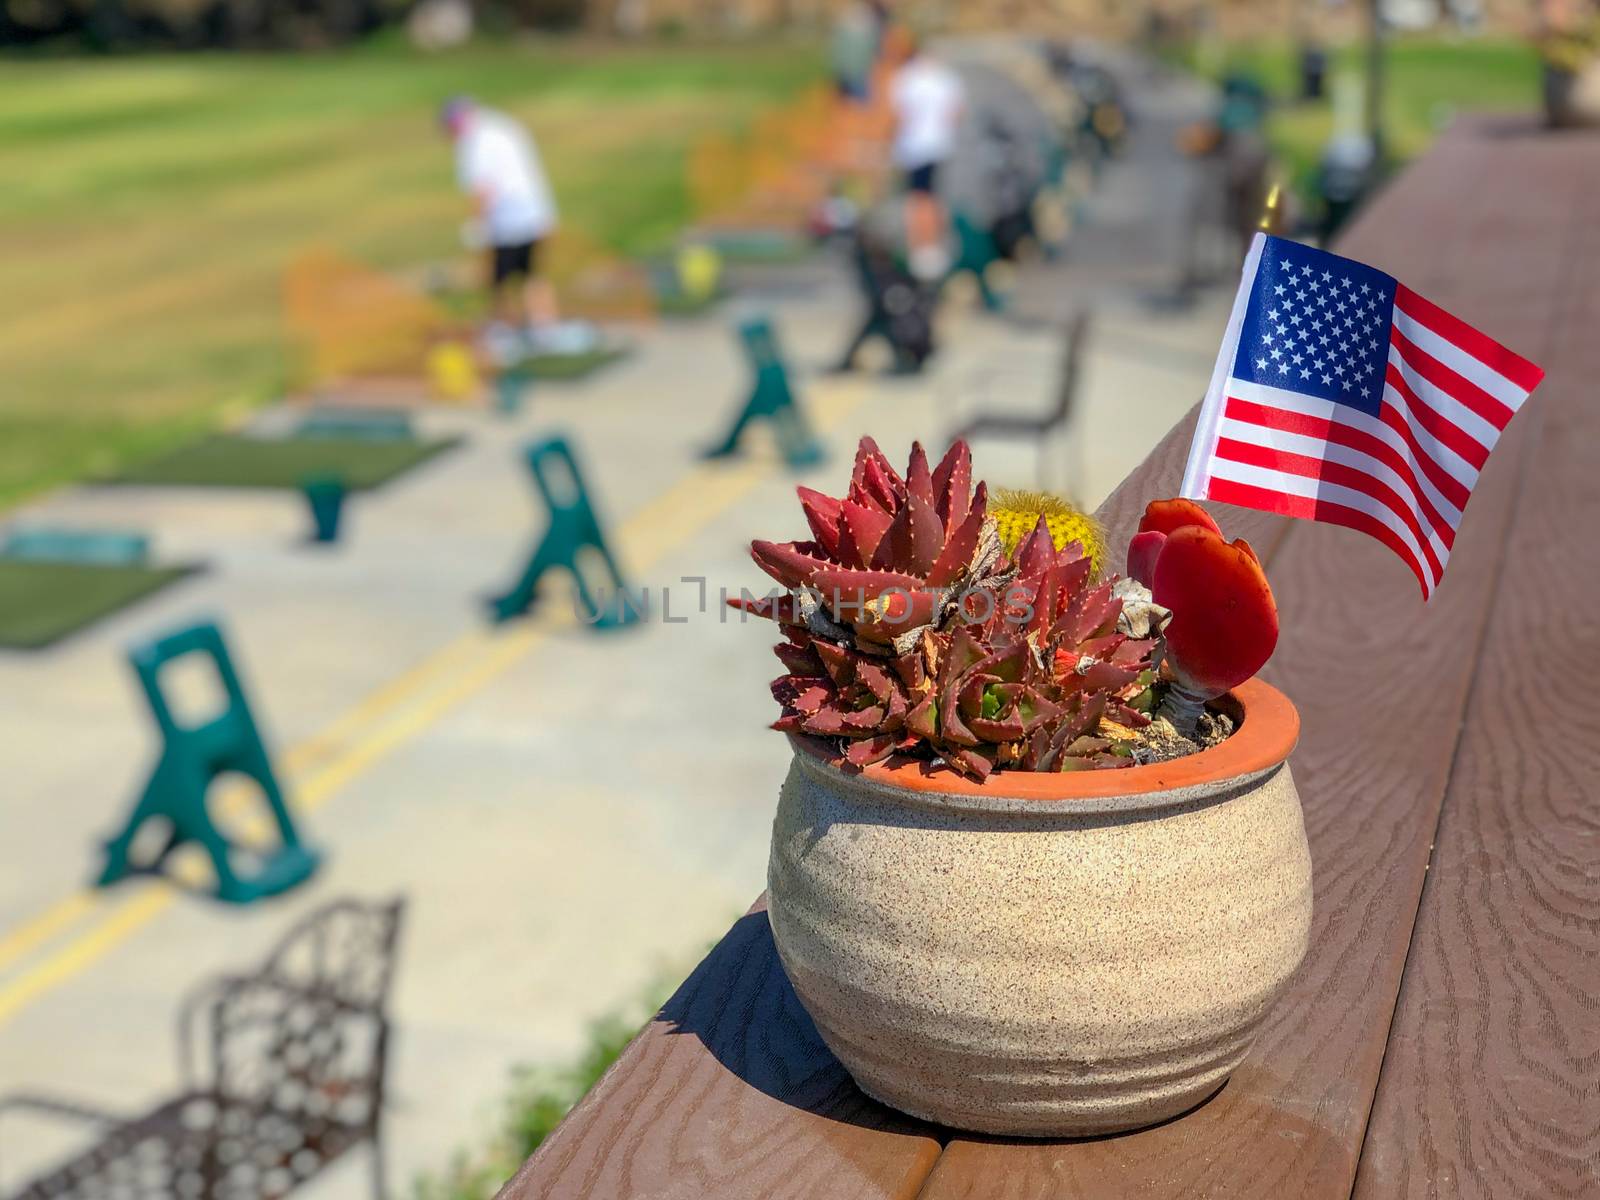 Patriotic flower pot with American flags and golfer on the background. by Bonandbon